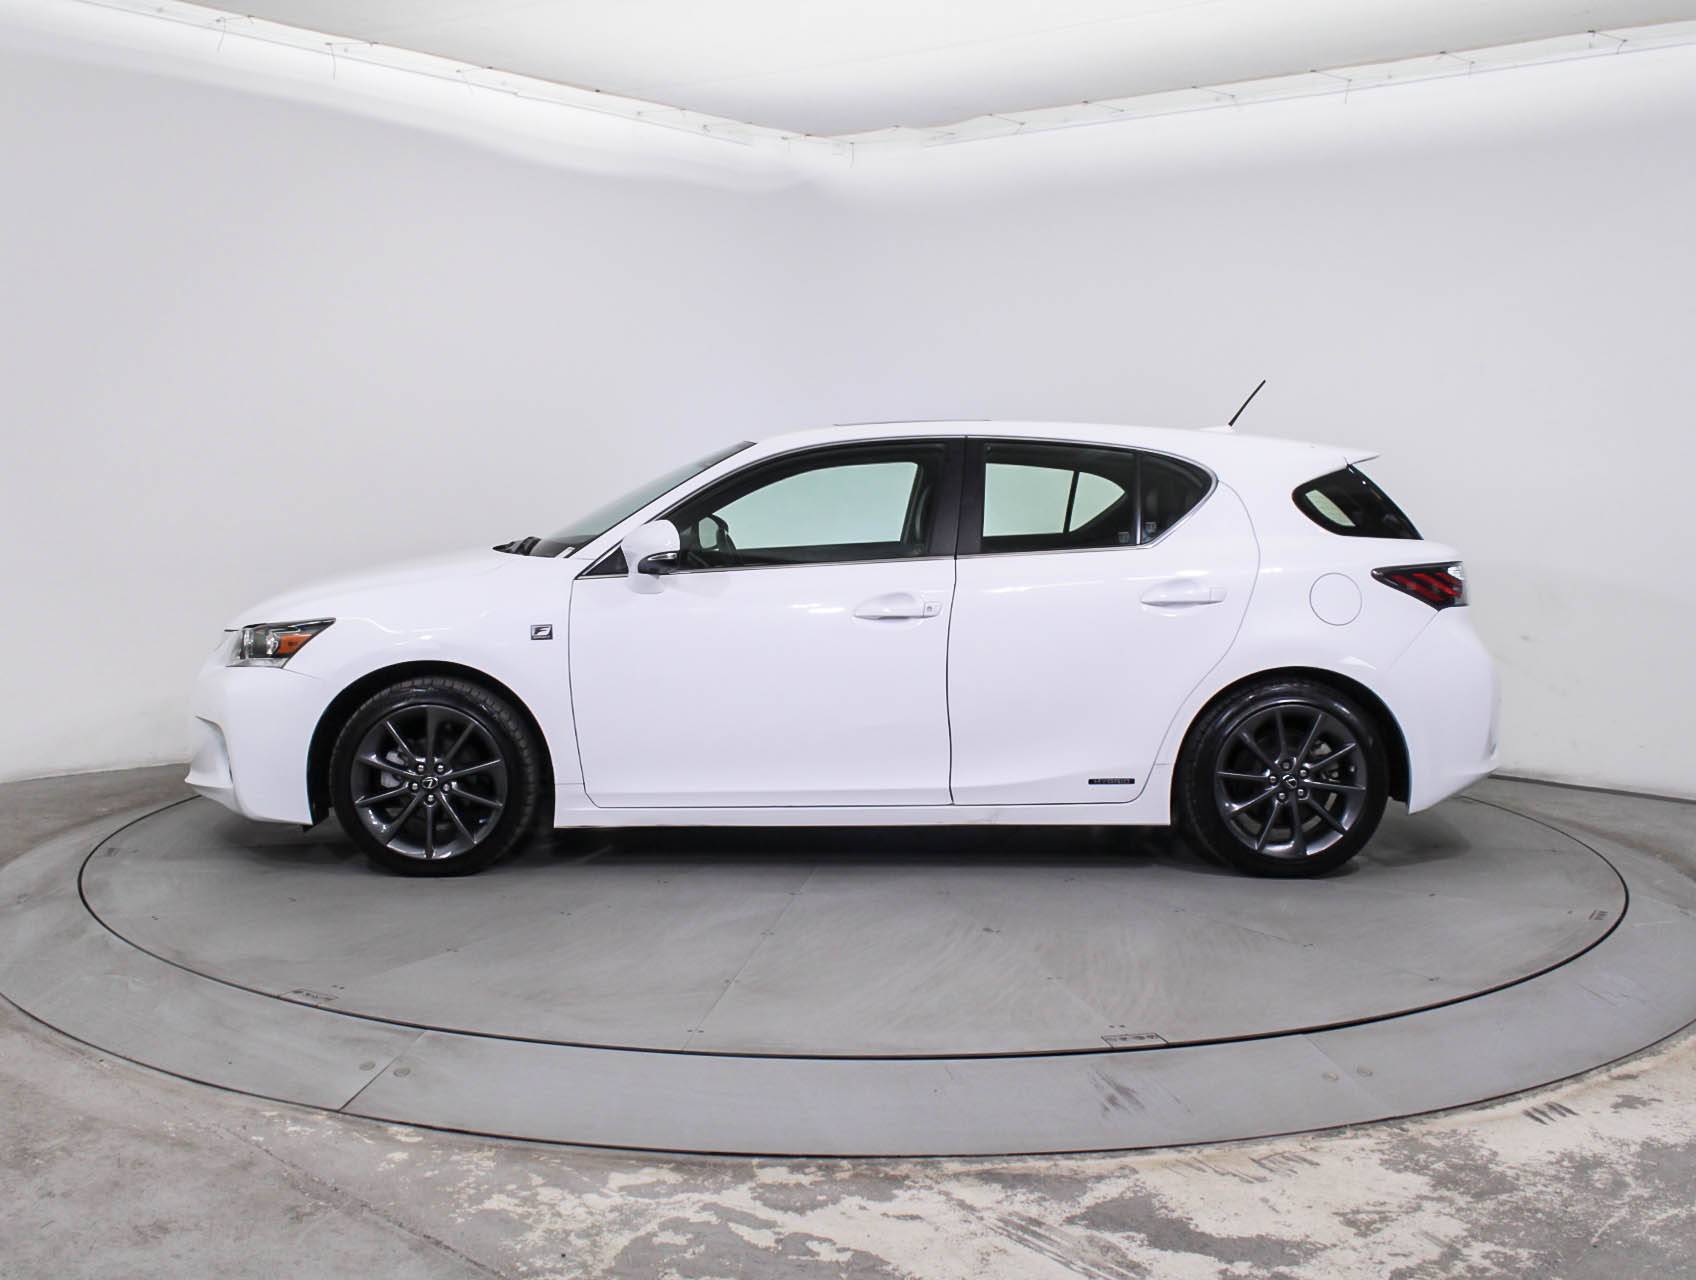 Used 2013 LEXUS CT 200H F Sport for sale in MIAMI | 88974